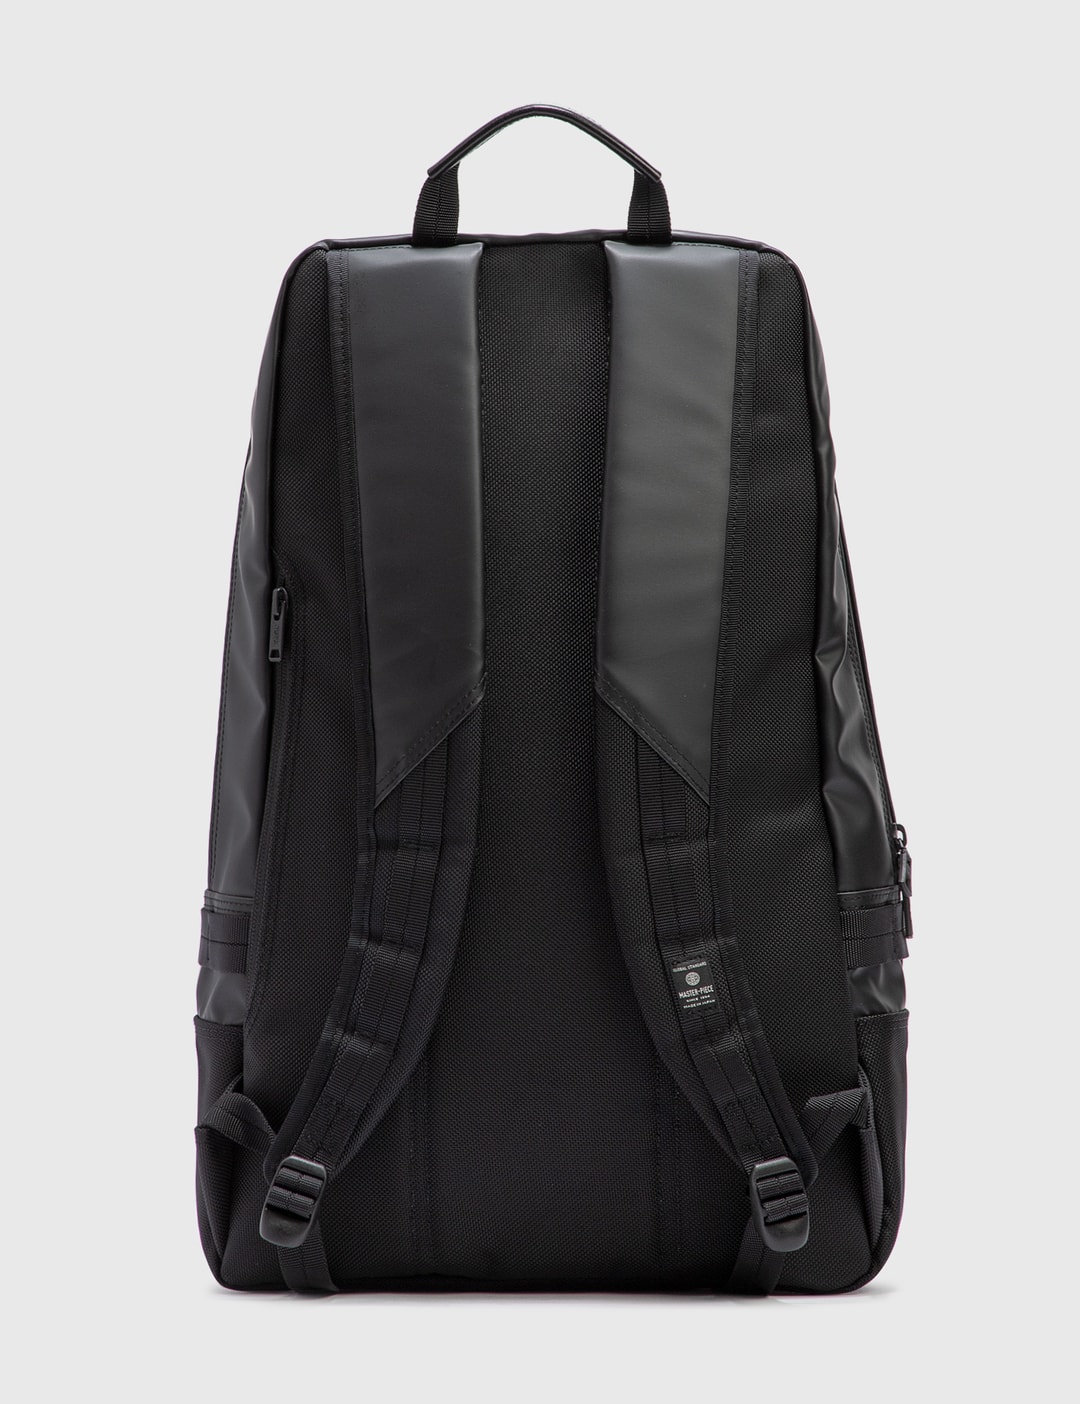 Master Piece - Slick Backpack | HBX - Globally Curated Fashion and ...